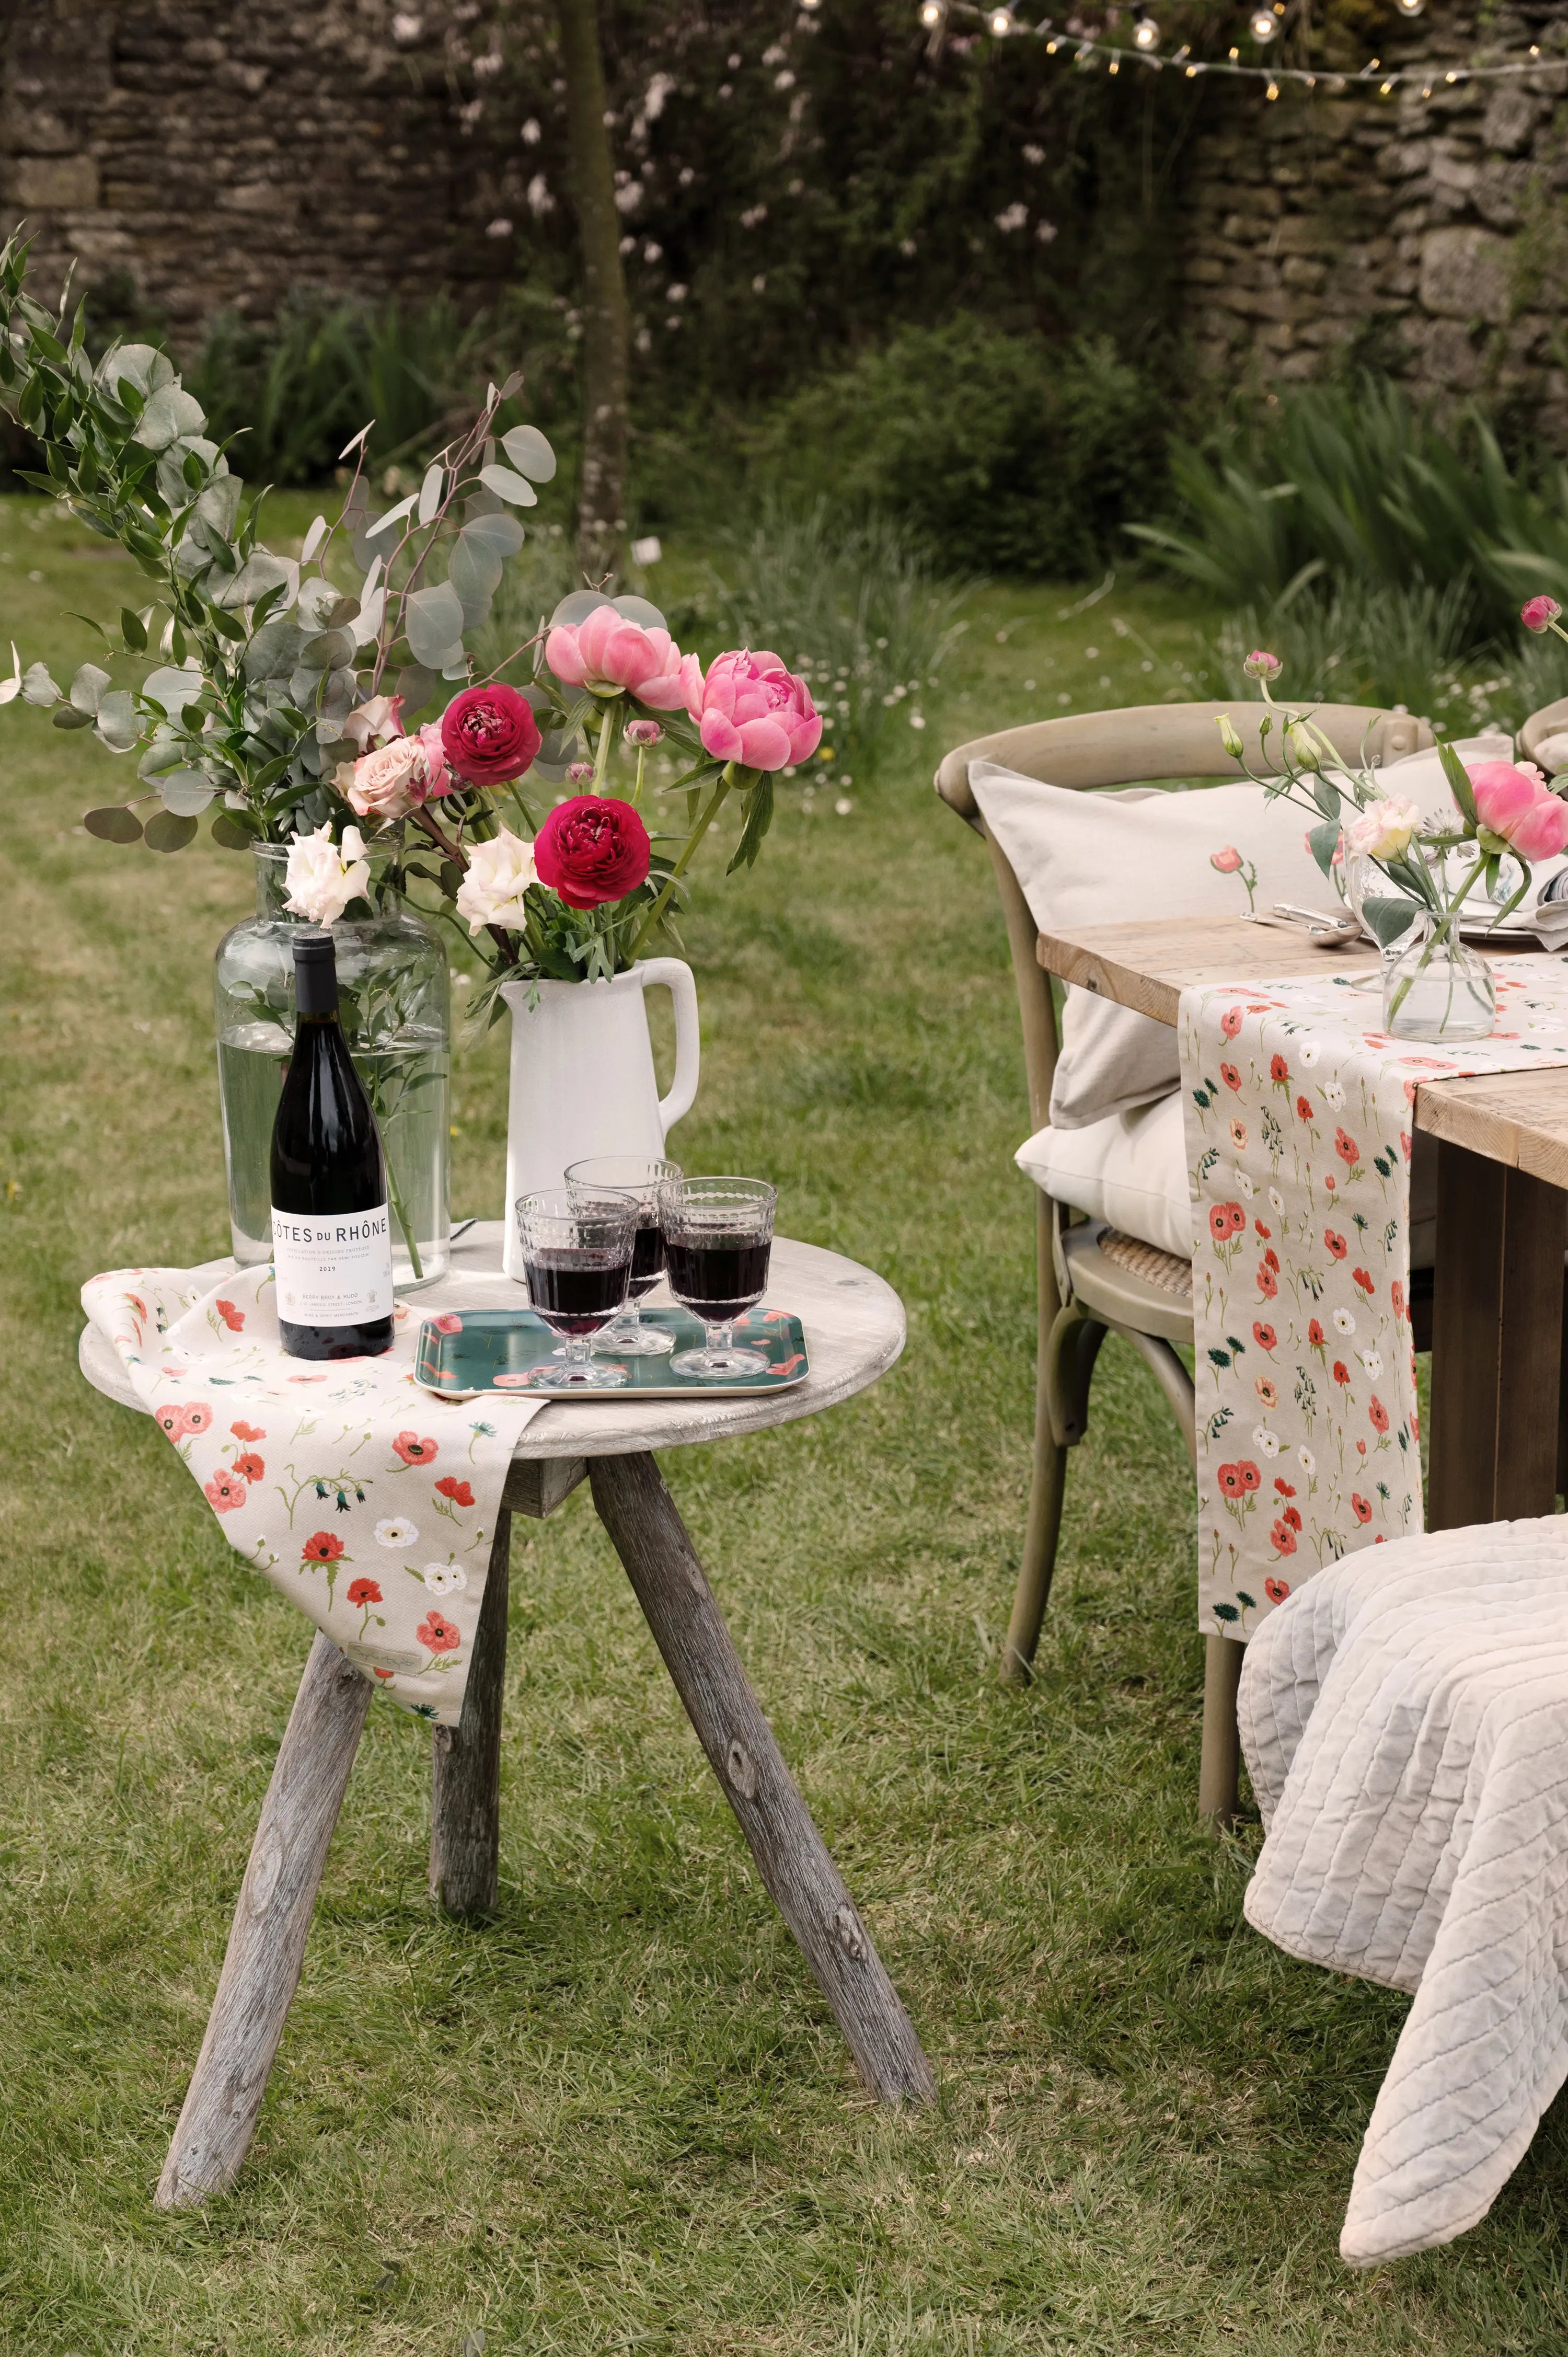 Create A Wildflower & Nature-Inspired Tablescape